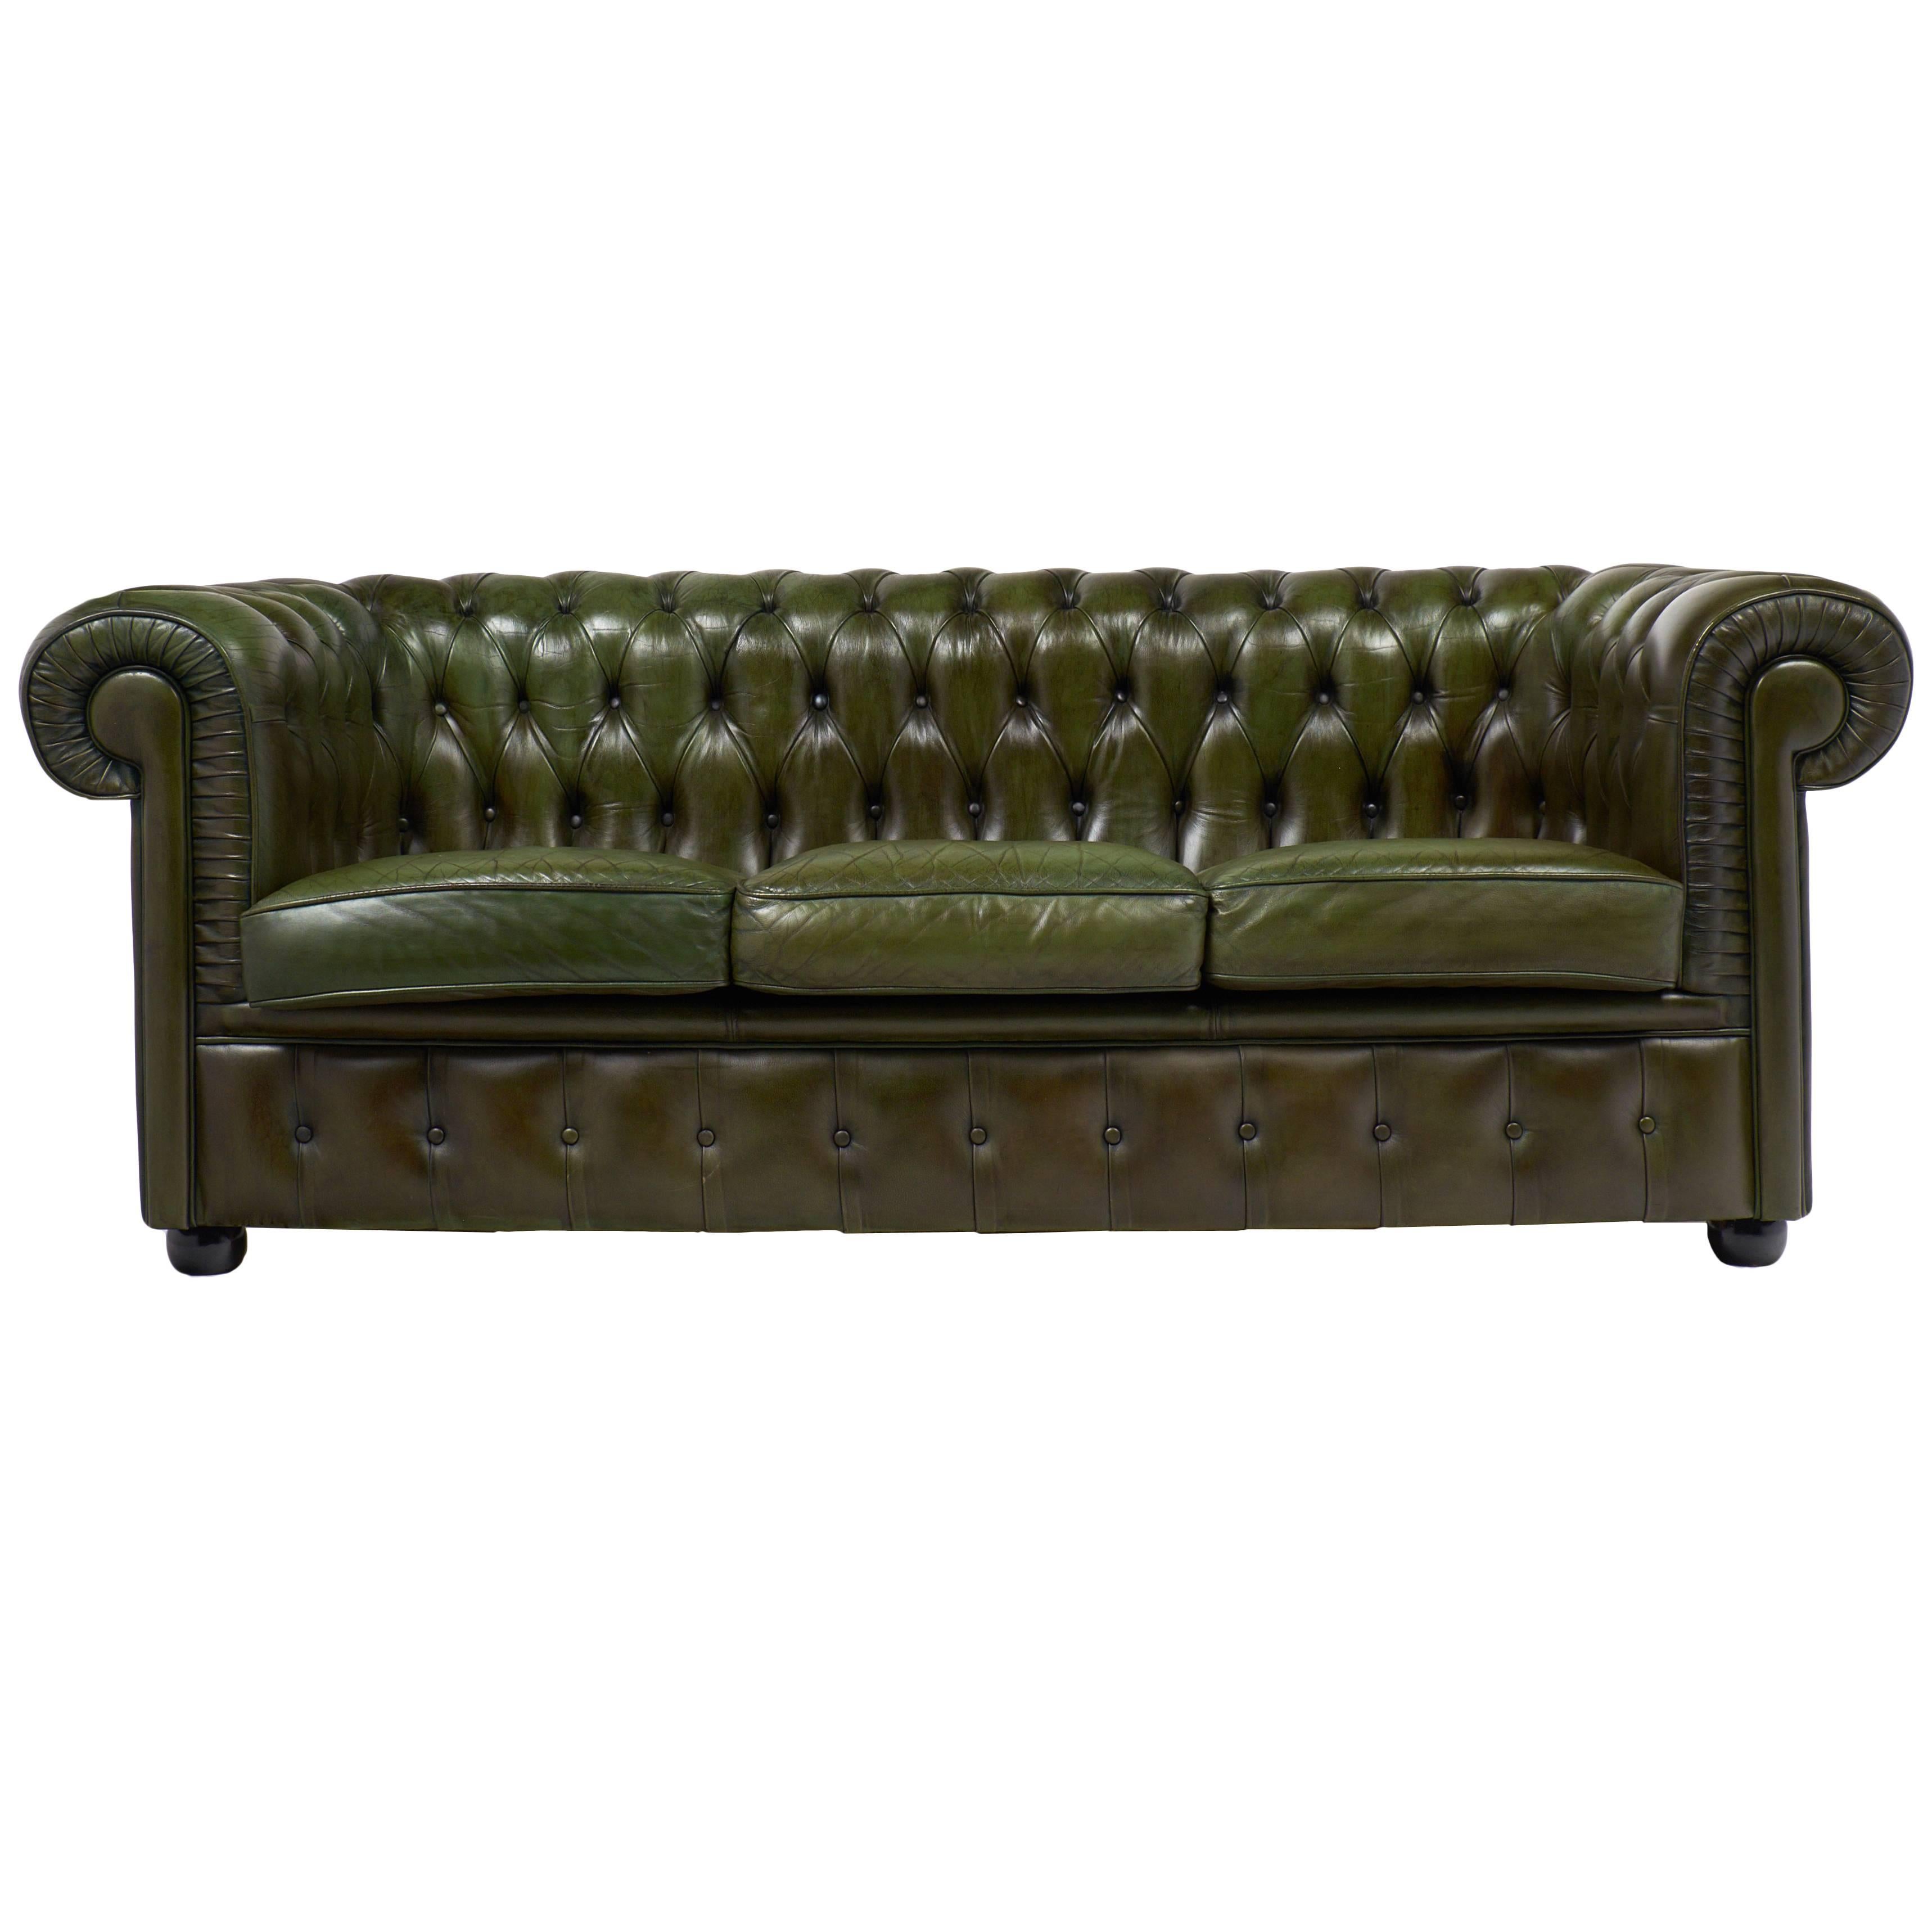 English Vintage Green or Bronze Chesterfield Sofa